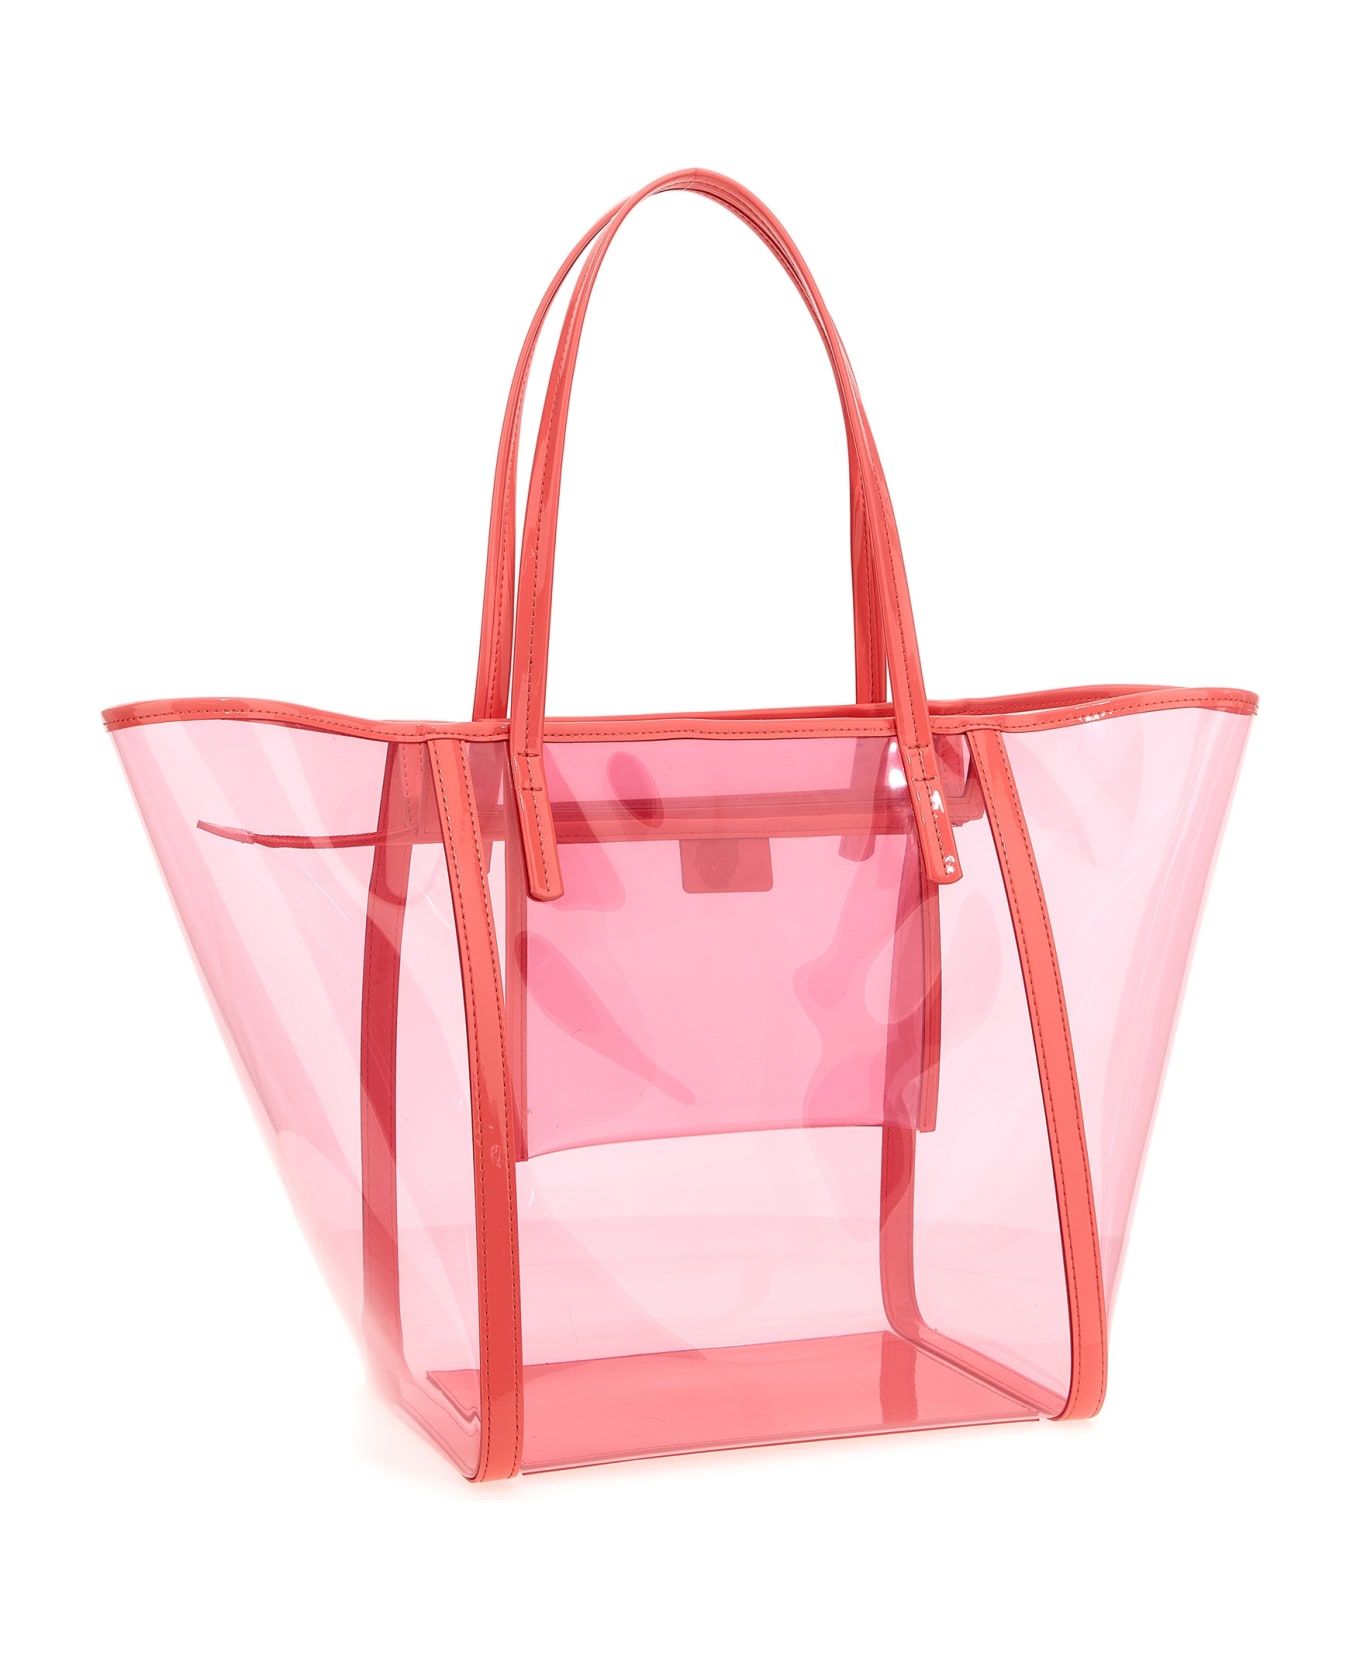 BY FAR Shopping 'club Tote' - Pink トートバッグ